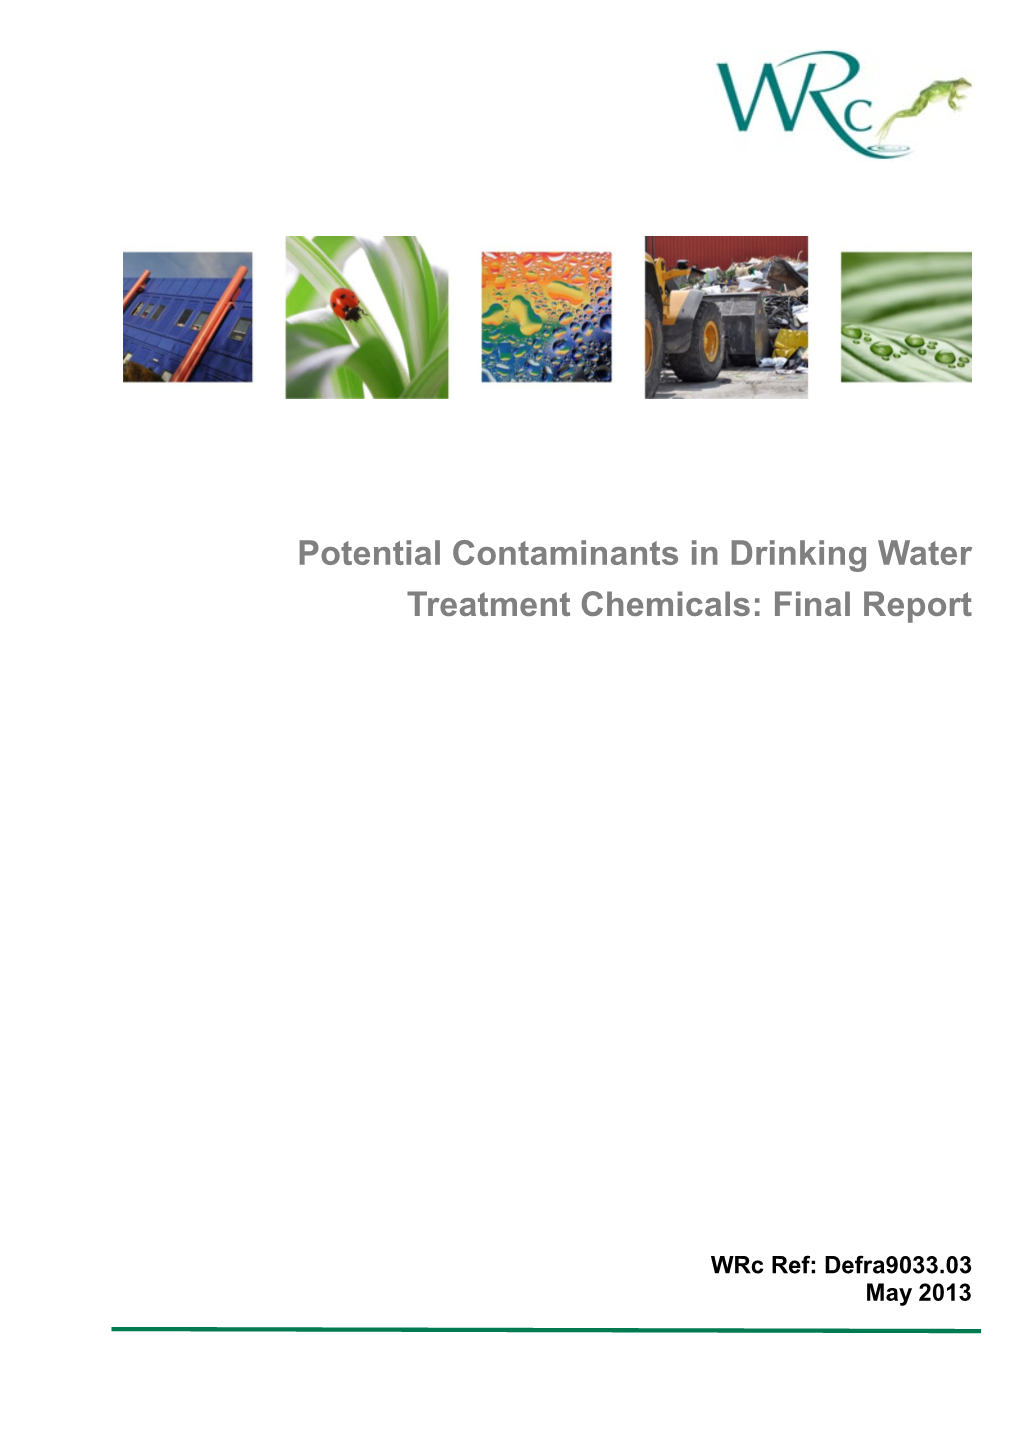 Potential Contaminants in Drinking Water Treatment Chemicals: Final Report